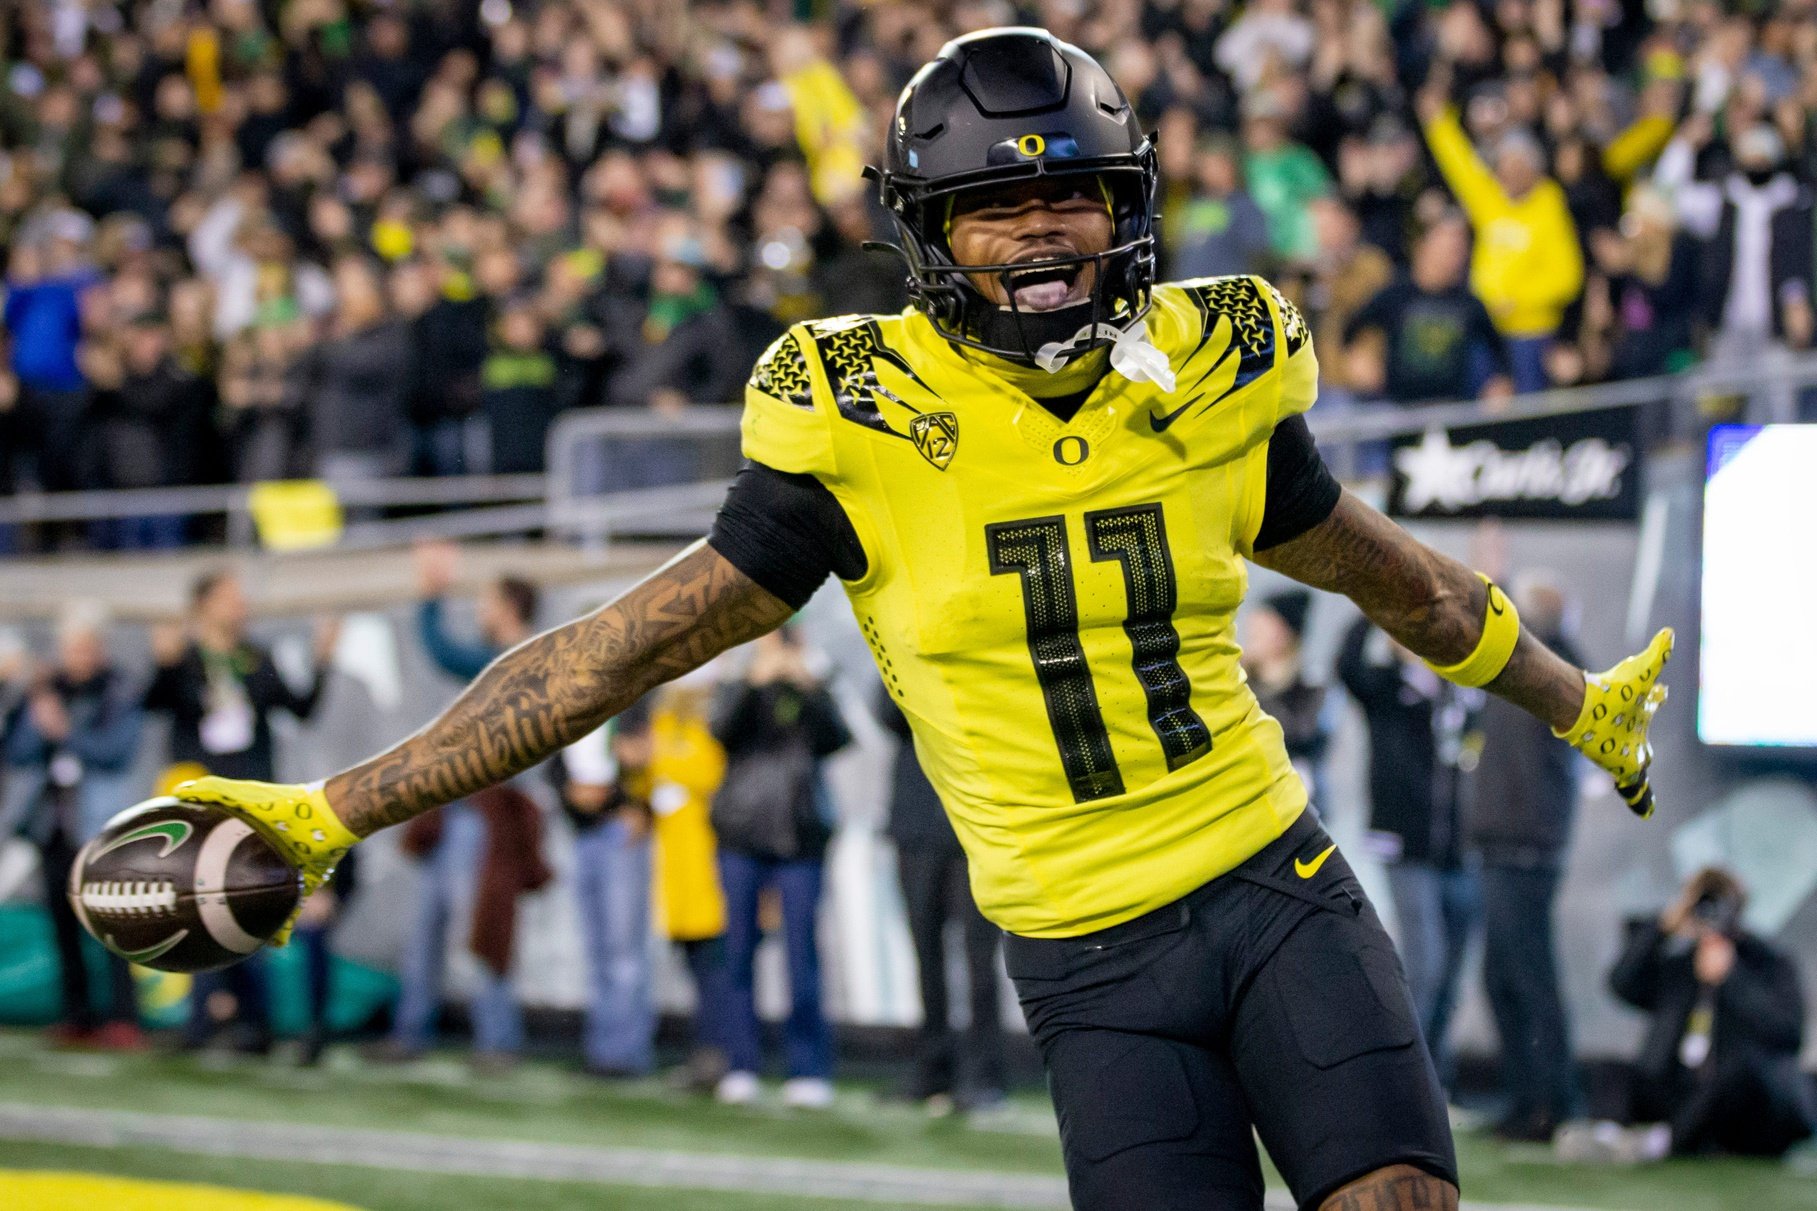 Troy Franklin Injury Update What We Know About the Oregon WR